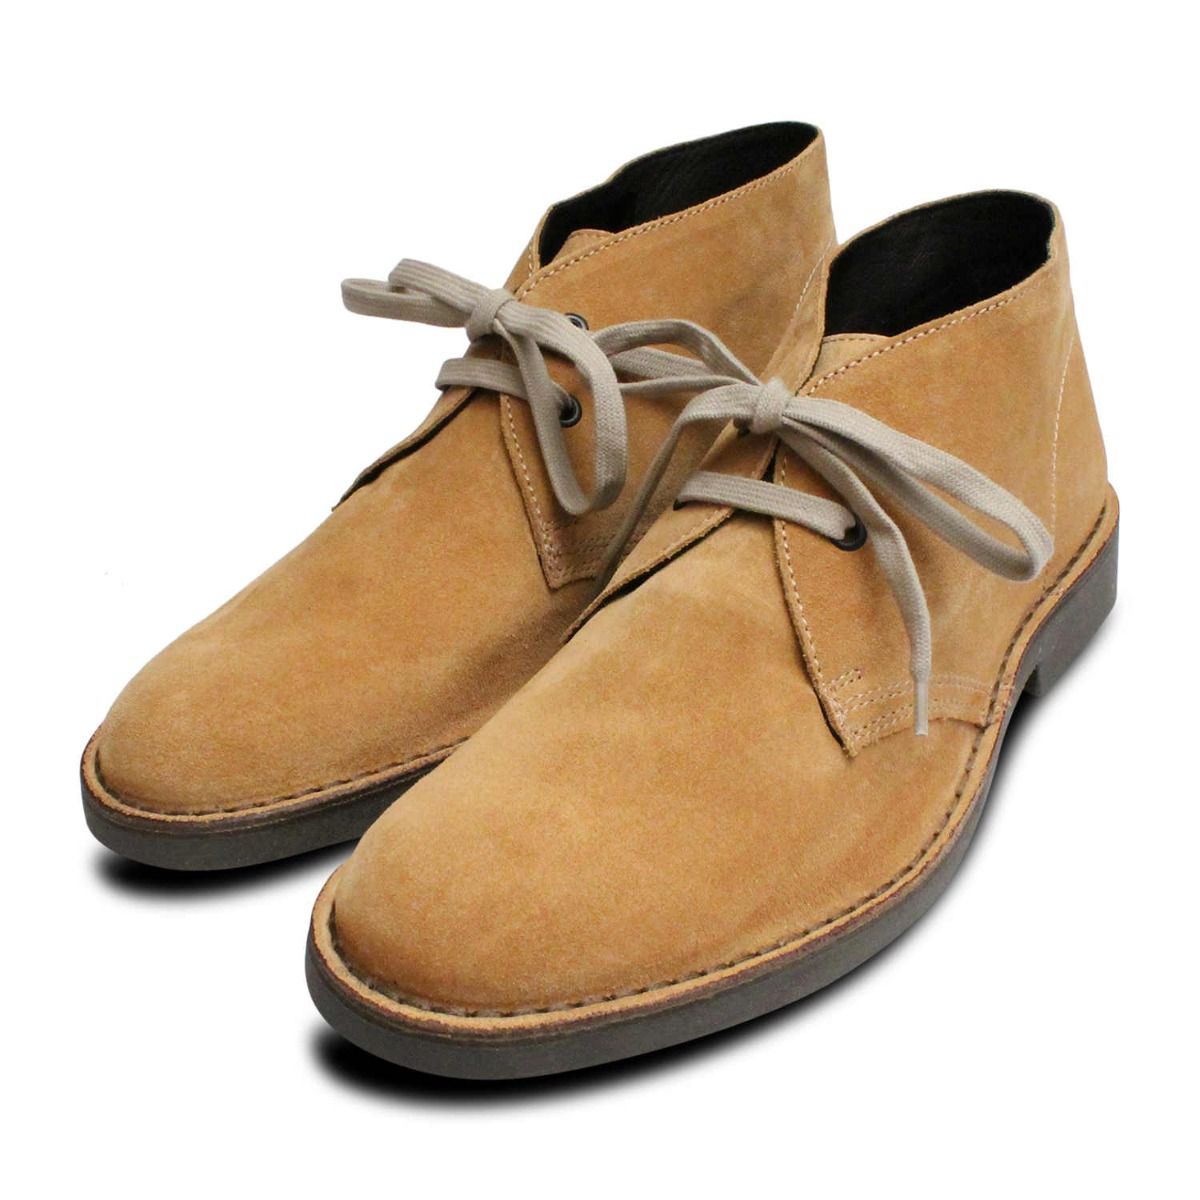 Clarks Leather And Suede Desert Boots in Brown for Men Mens Shoes Boots Chukka boots and desert boots 